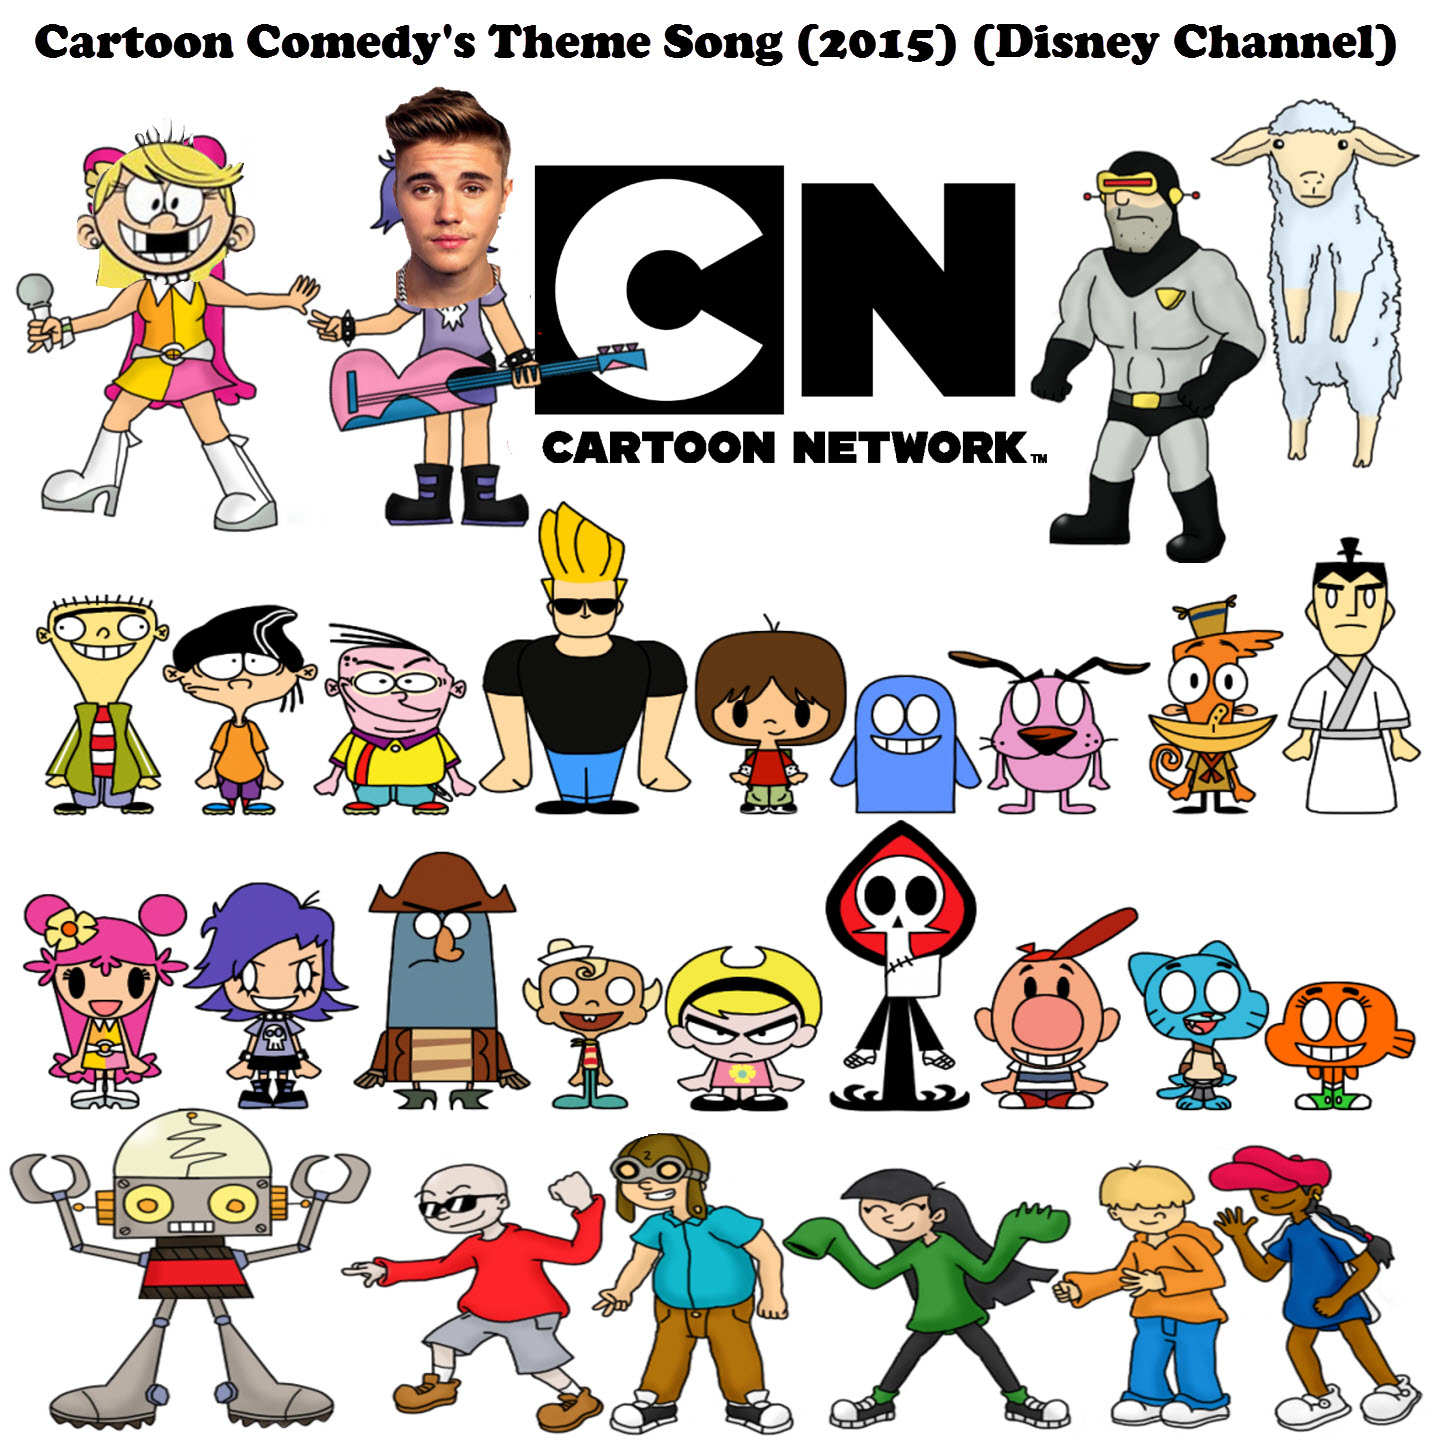 Cartoon Comedy's Theme Song - Disney Channel - Wit by dgoldish on DeviantArt